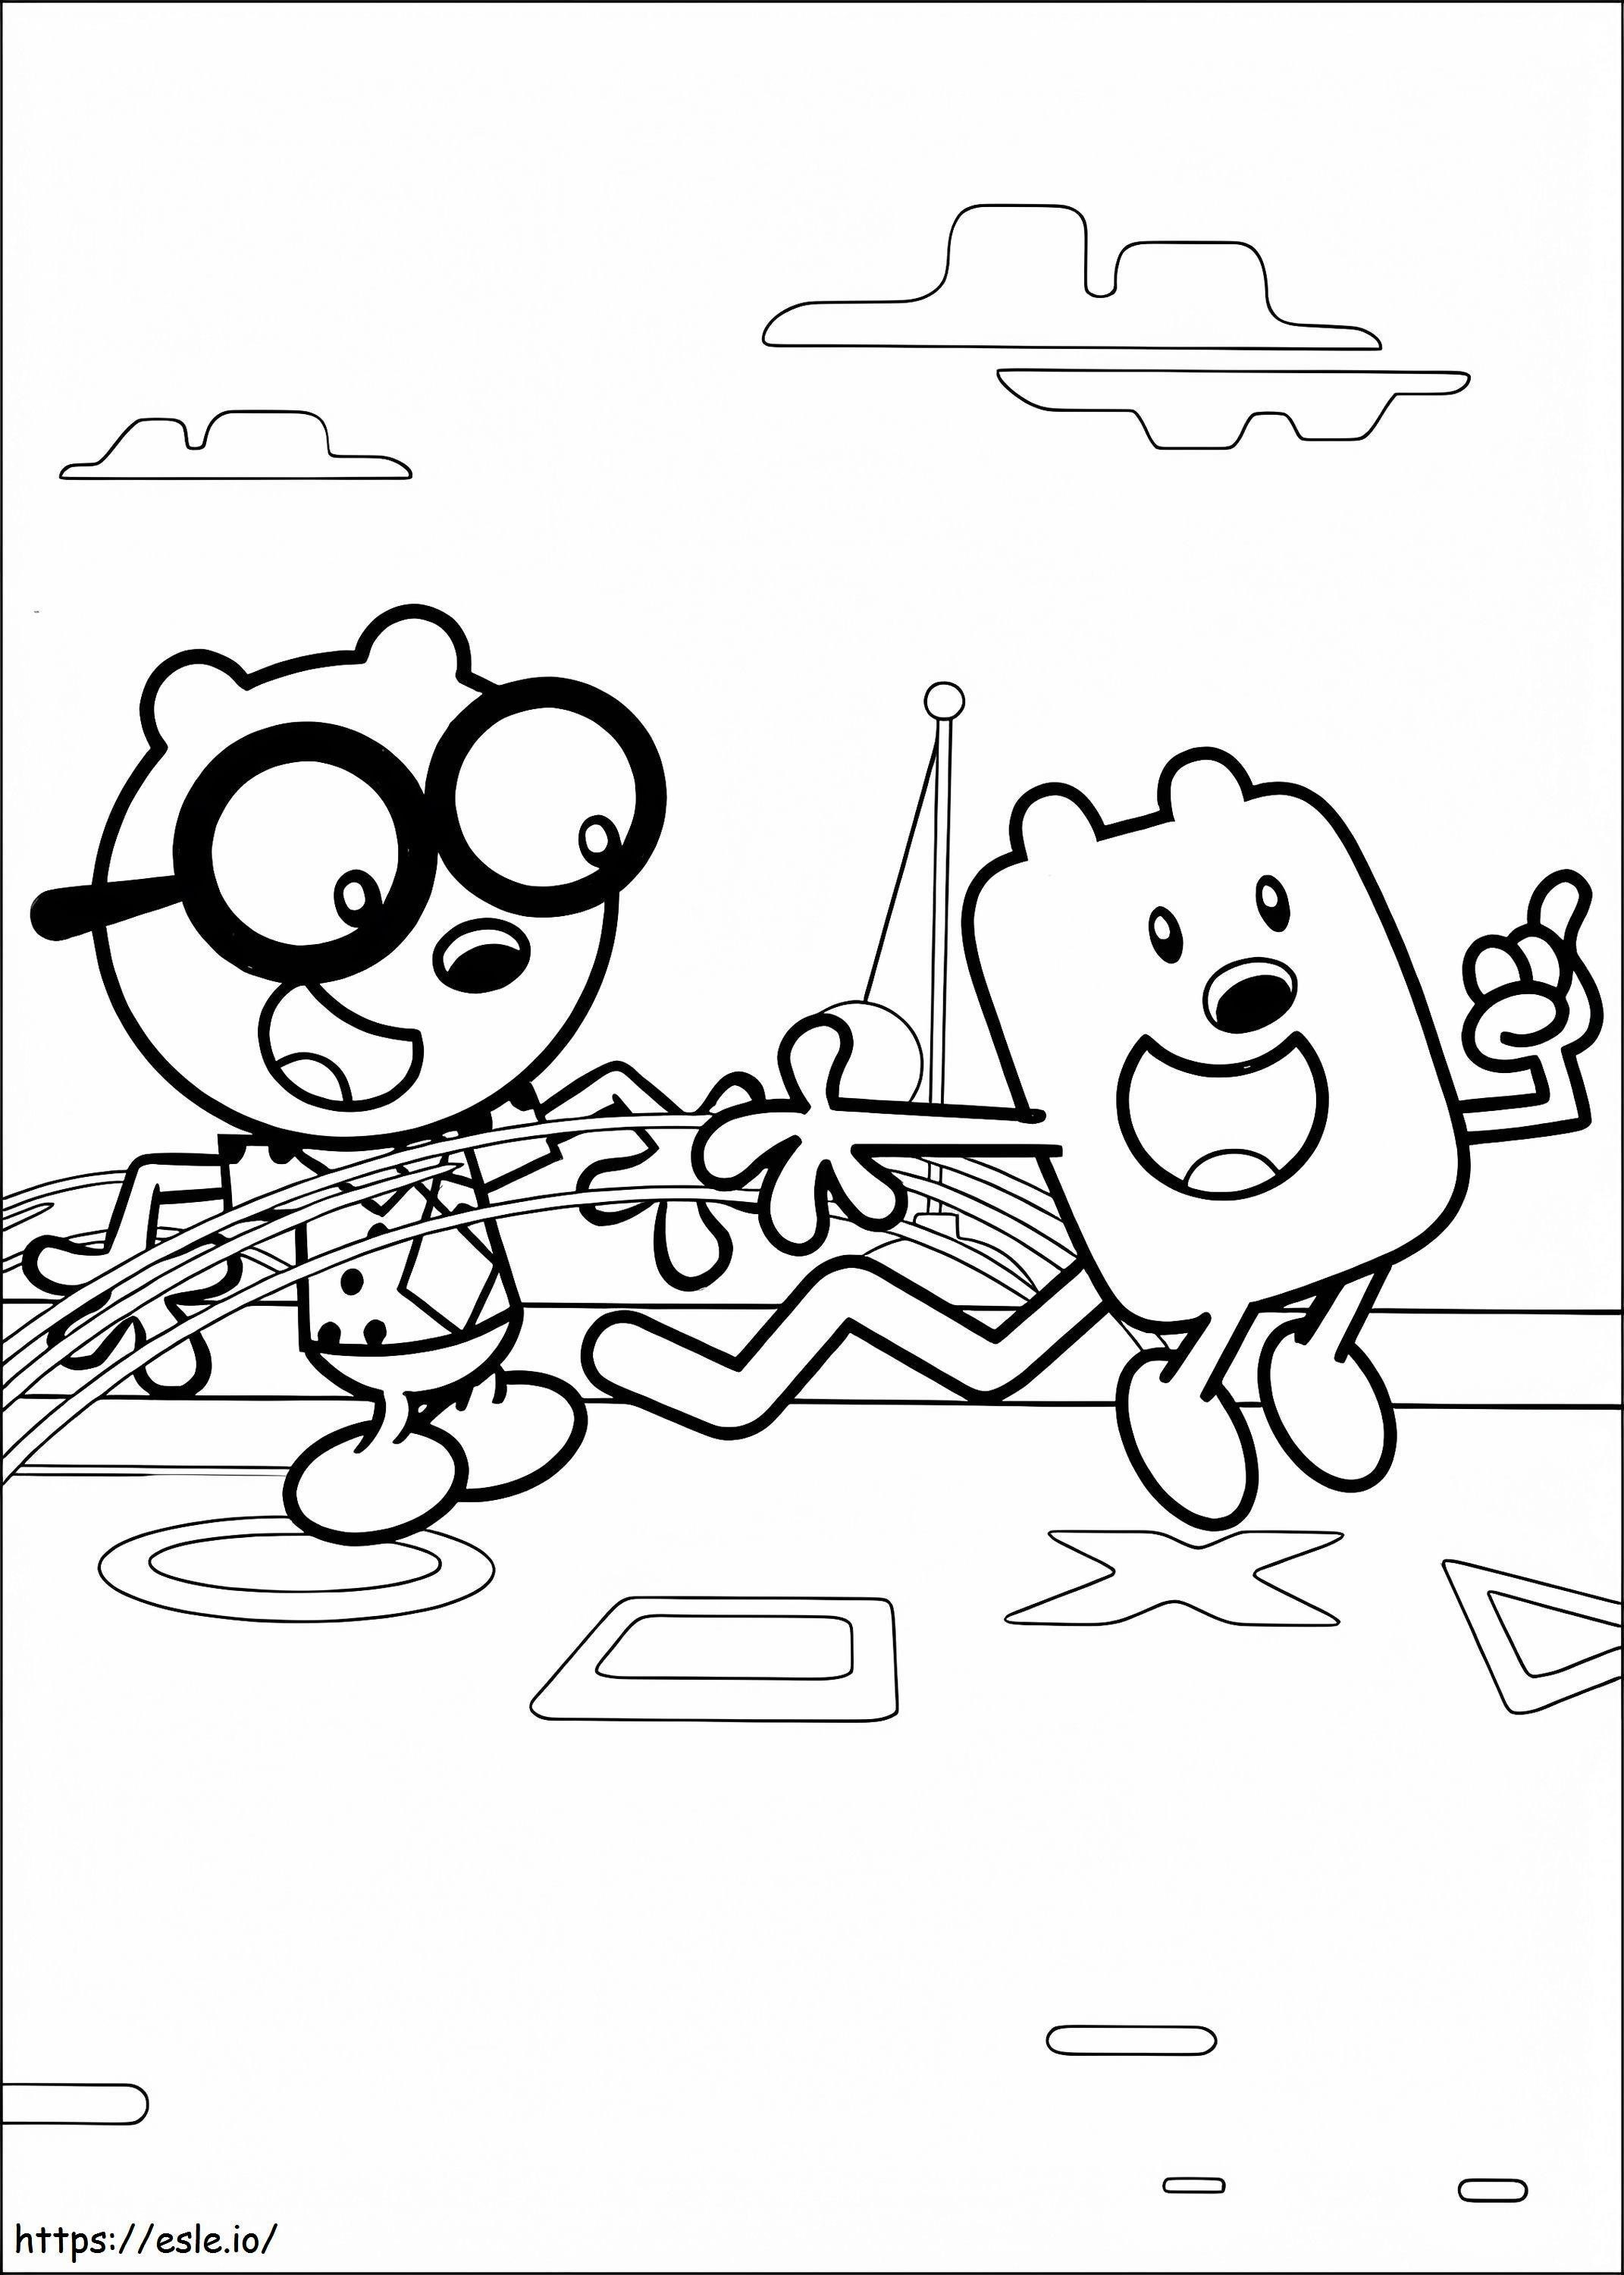 Walden And Wubbzy coloring page